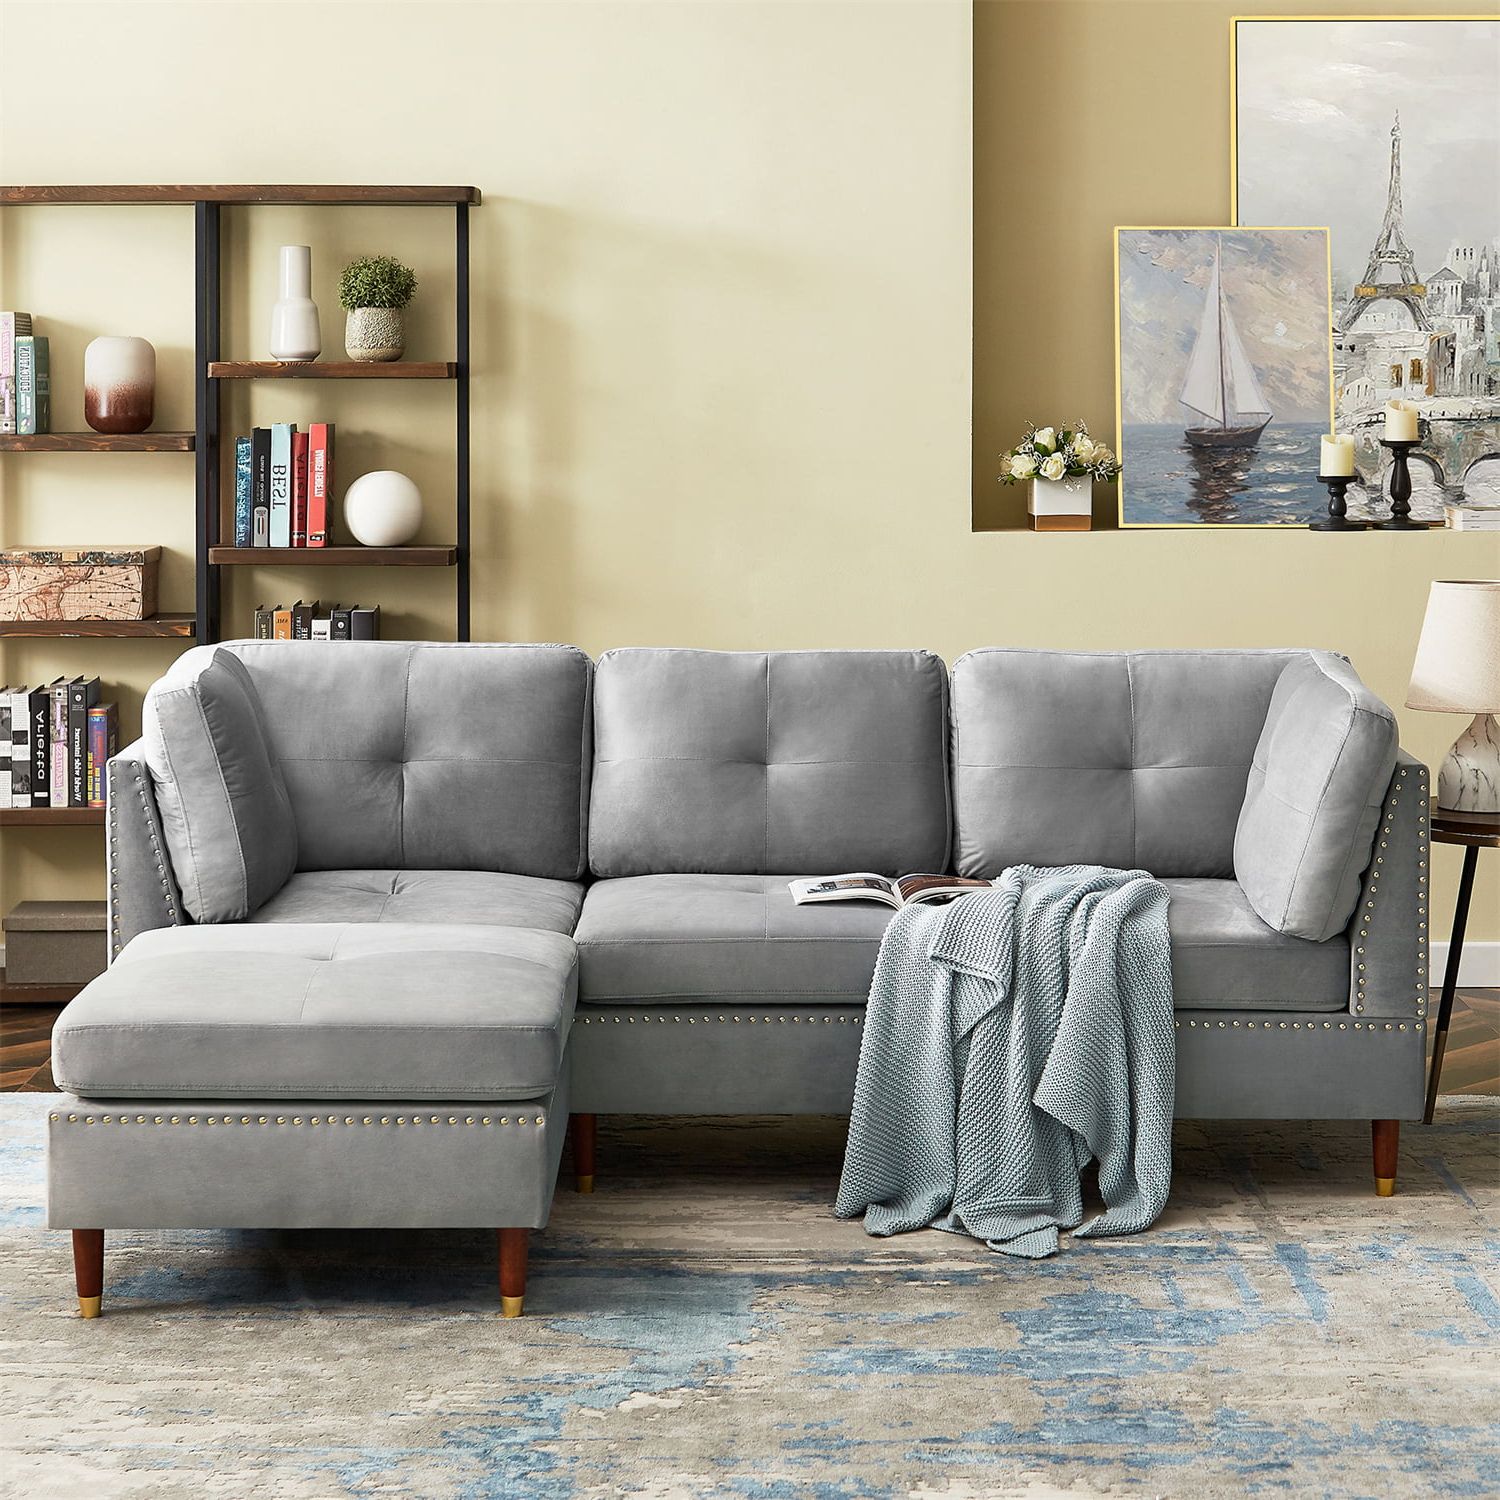 88.6" Convertible Sectional Sofa Couch With Ottoman, Modern Tufted L Shaped  Sofa Sleeper, 3 Seat Velvet Sofa With Reversible Chaise & Nail Head, For  Living Room, Apartment And Small Space, Grey – Walmart Inside 3 Seat Sofa Sectionals With Reversible Chaise (Gallery 20 of 20)